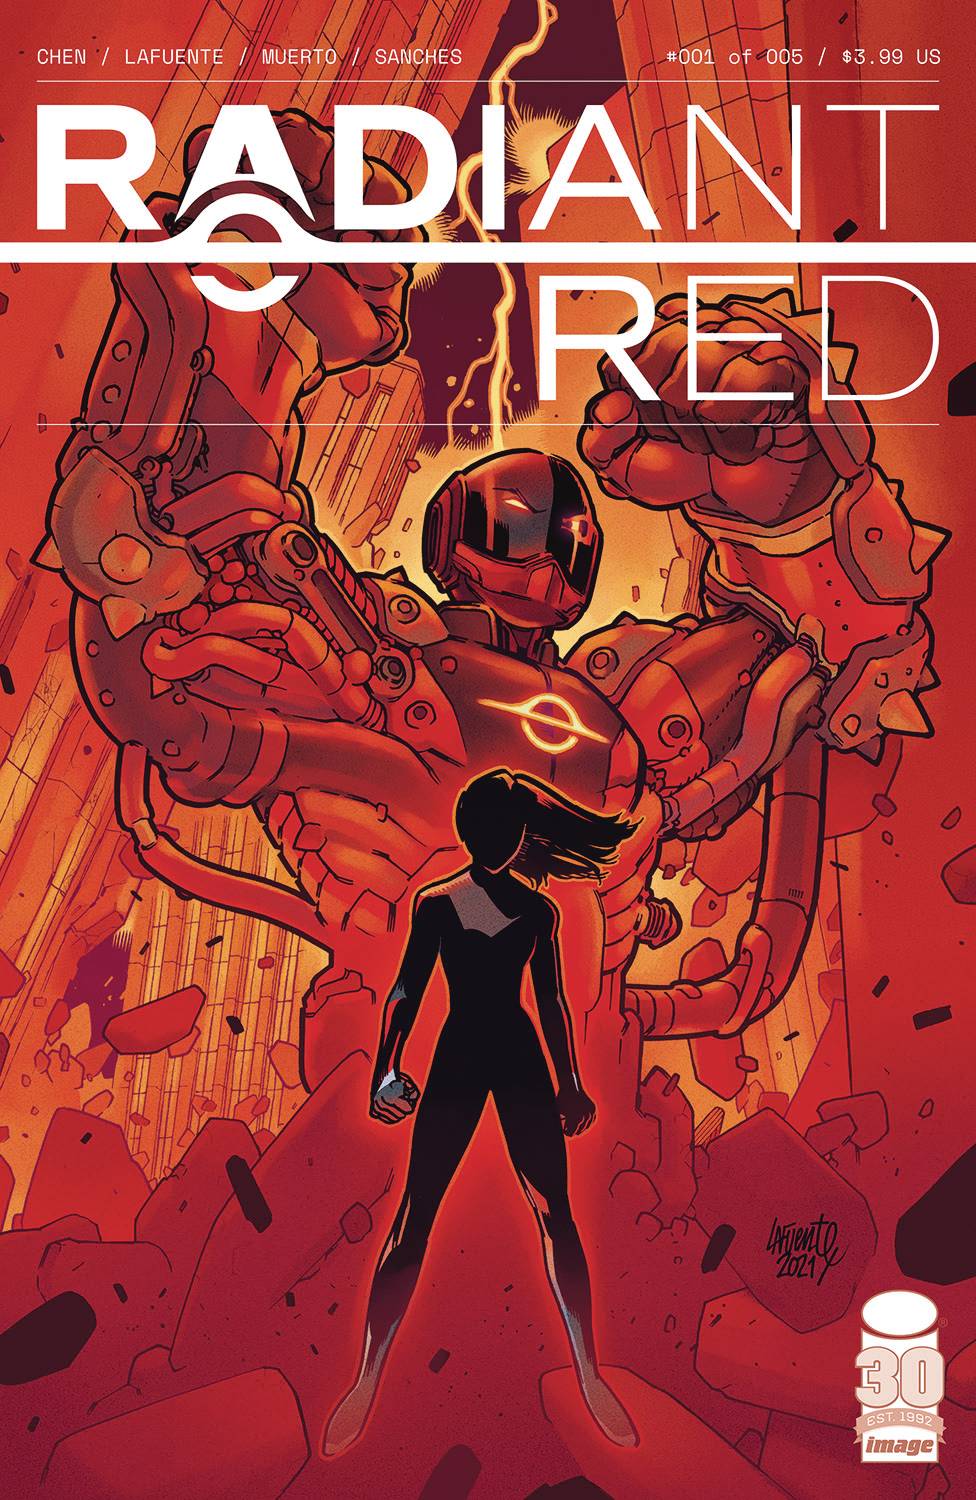 RADIANT RED #1 (OF 5) CVR A LAFUENTE & MUERTO